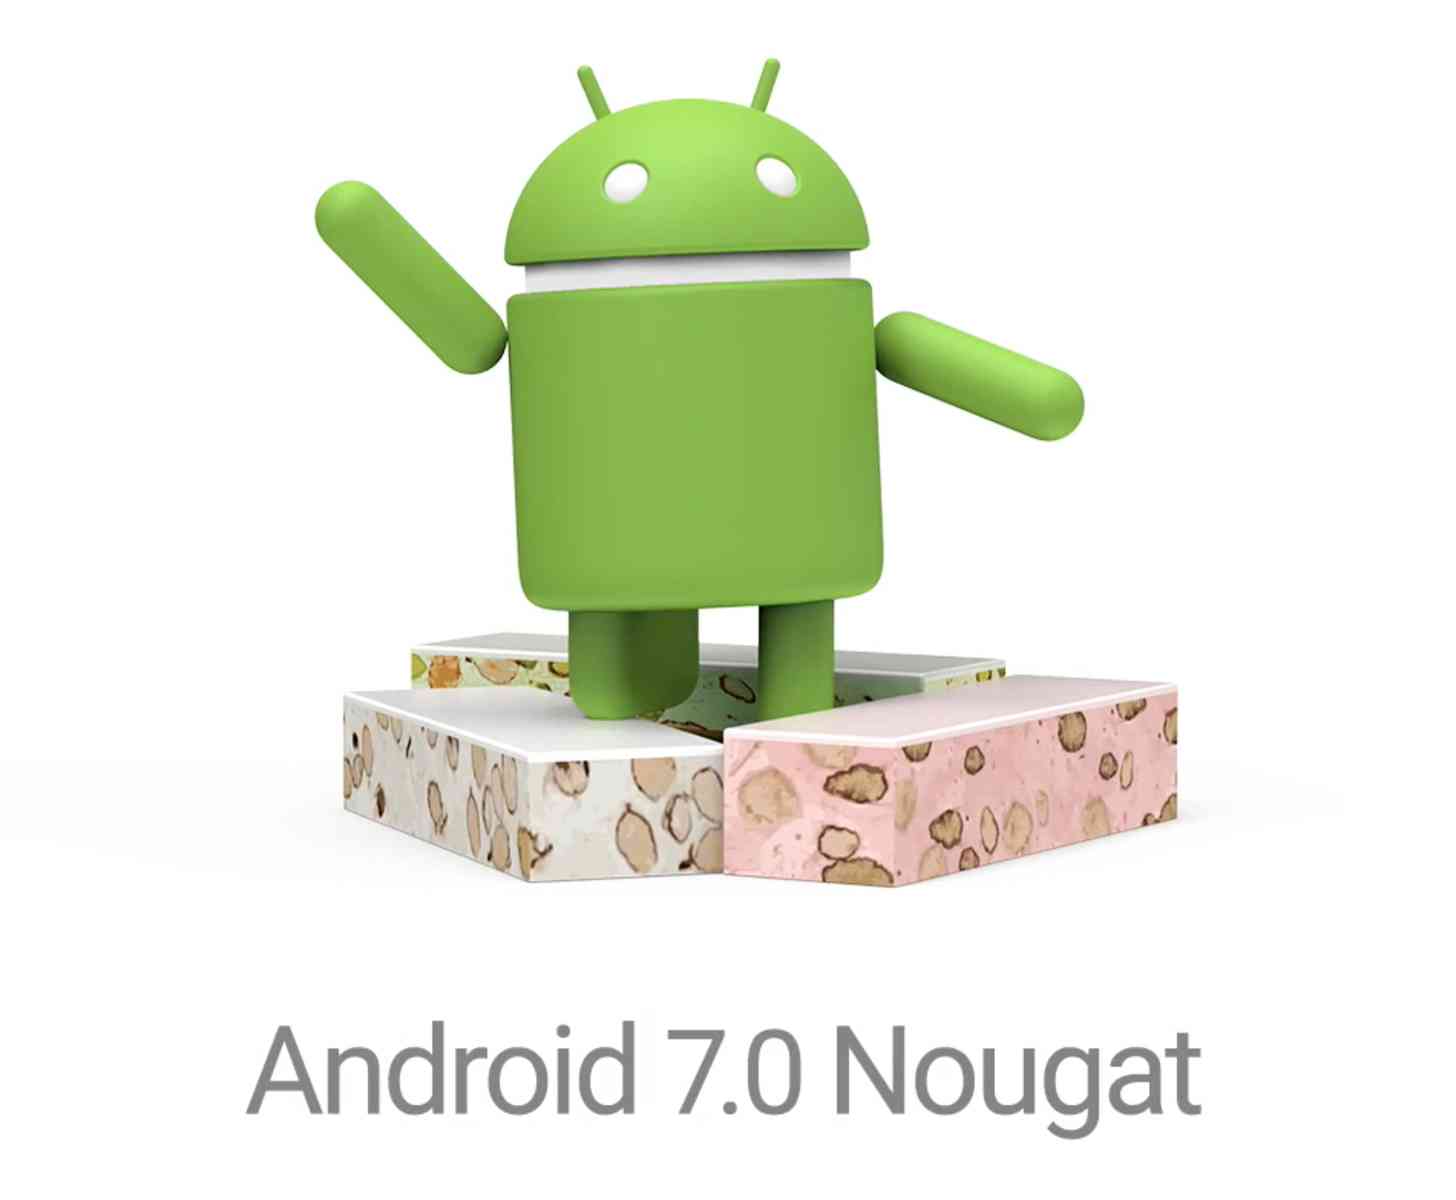 Android 7.0 Nougat official